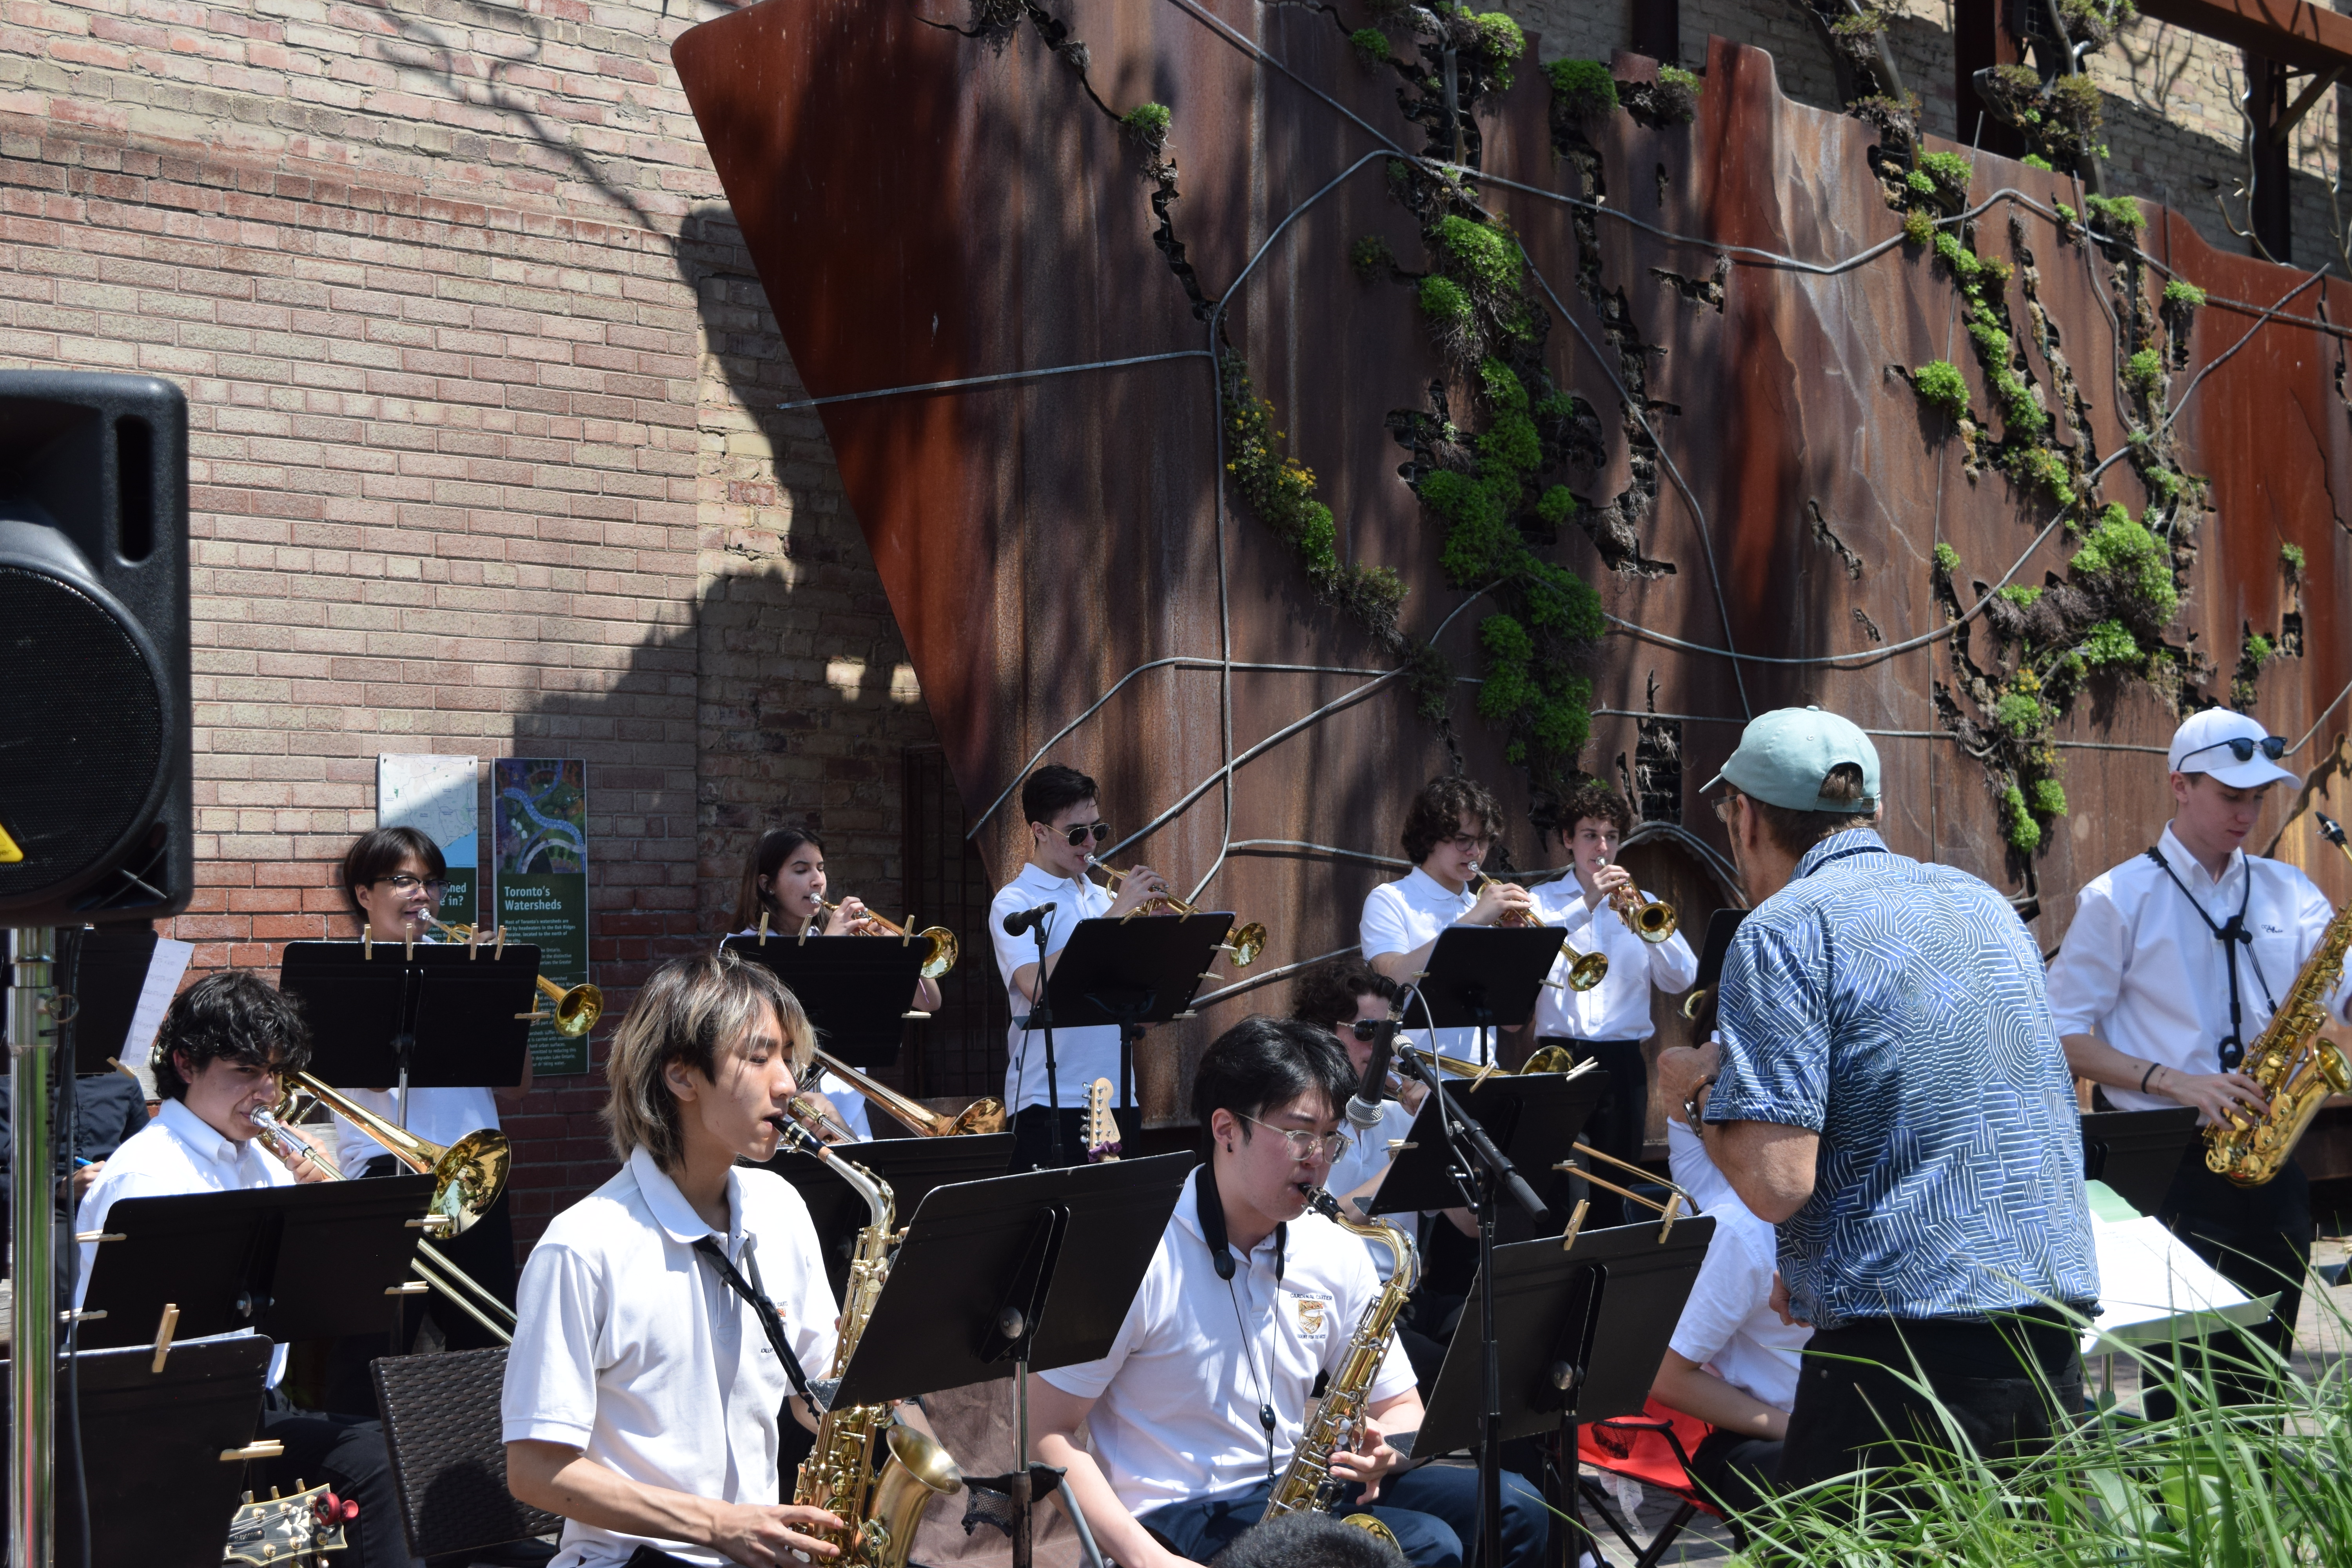 A band playing outdoor. 